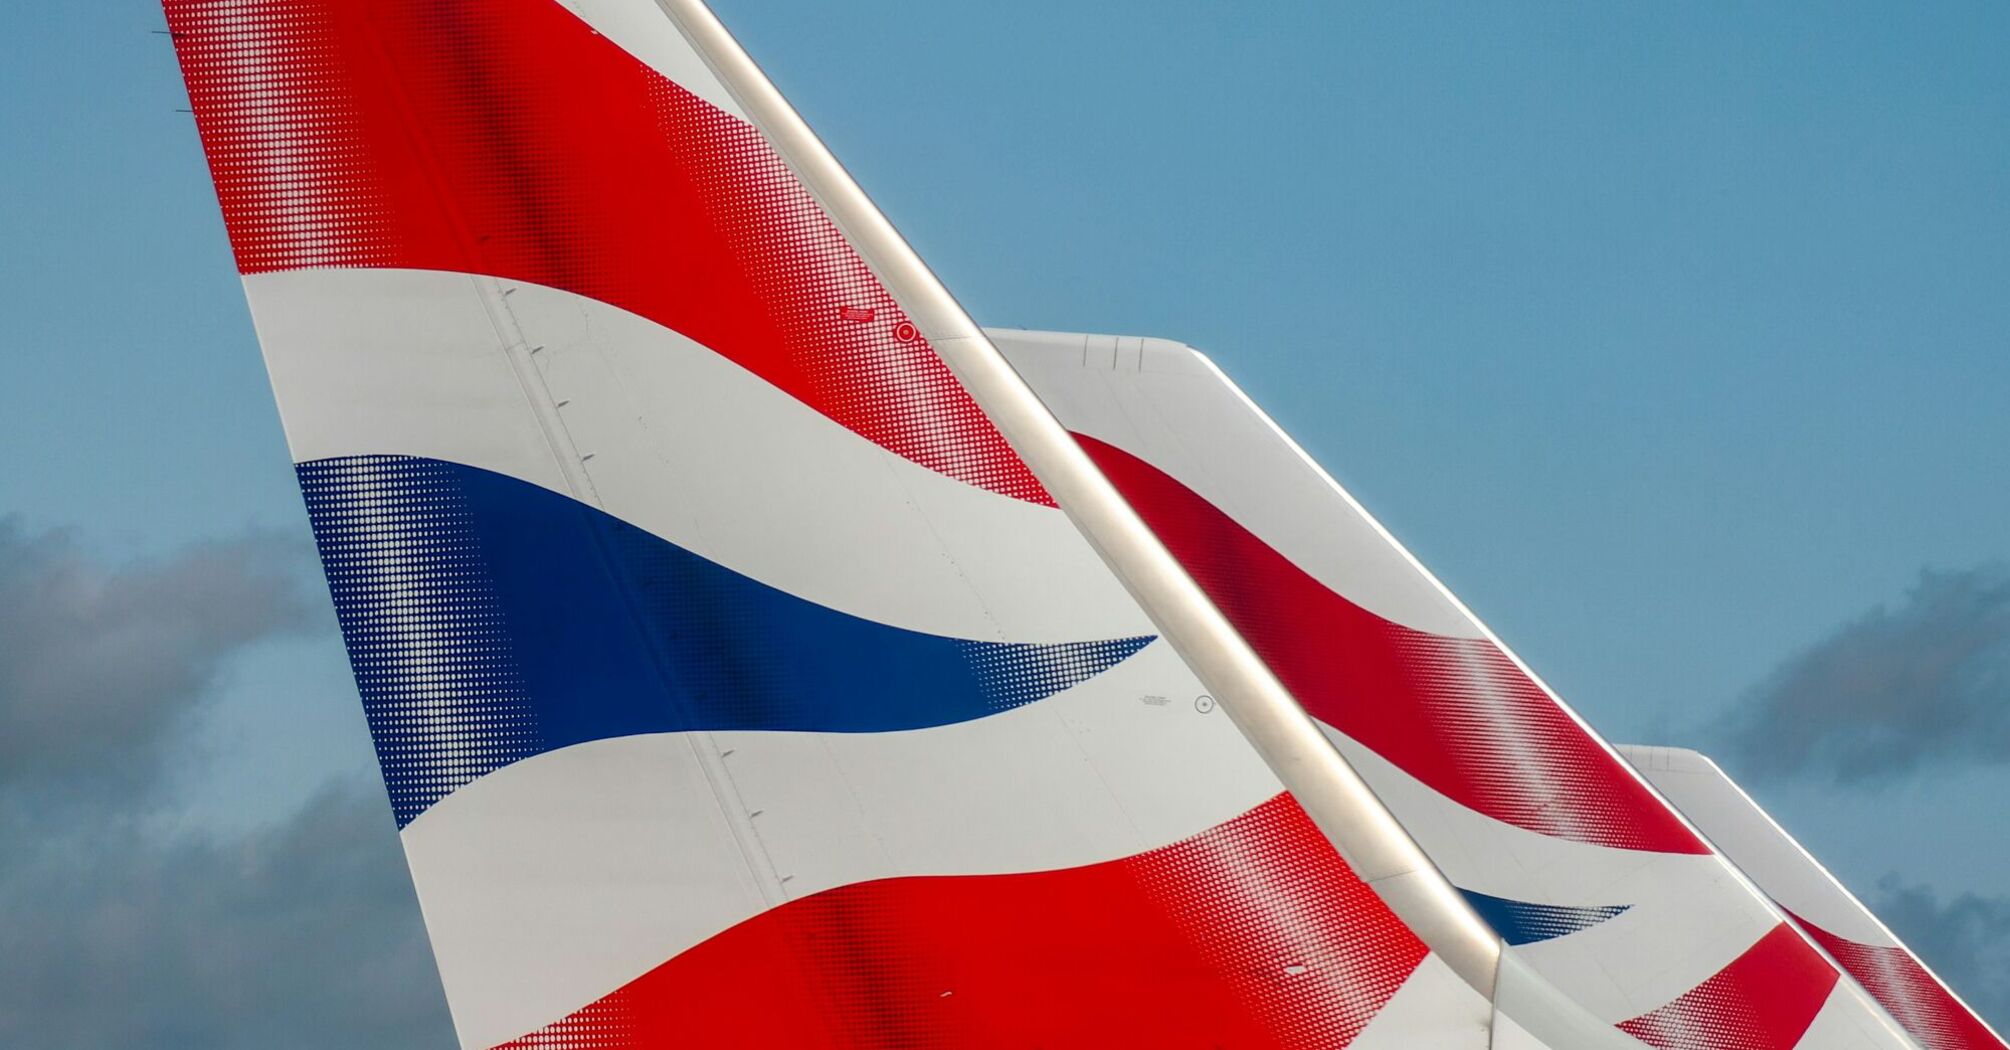 Close-up view of the tail fins of British Airways aircraft displaying the iconic red, white, and blue Union Jack design